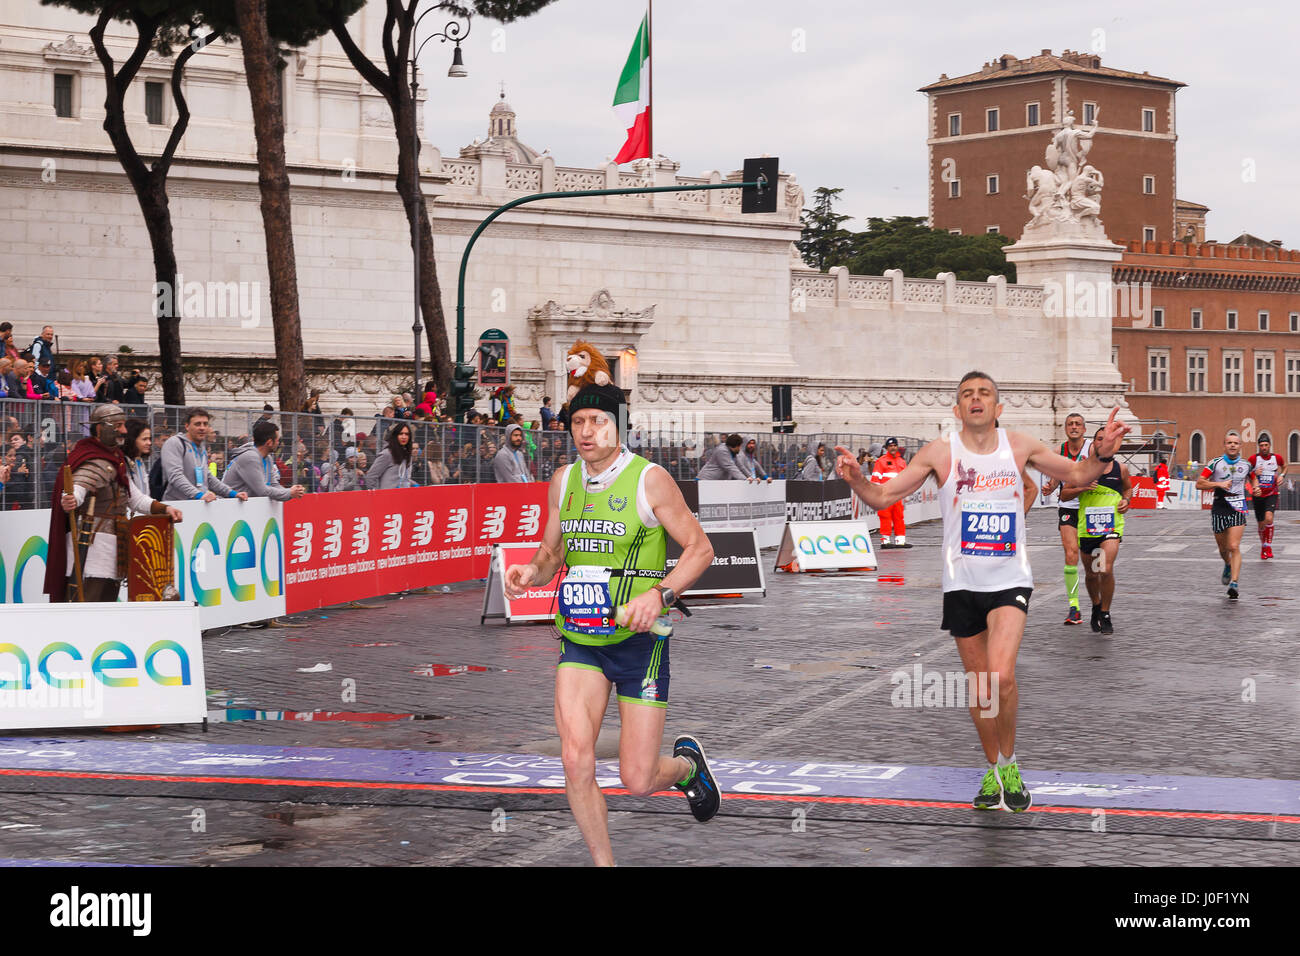 Rome, Italy - April 2nd, 2017: Athletes participating in the 23rd marathon in Rome arrive exhausted at the finish line on Via dei Fori Imperiali. Stock Photo